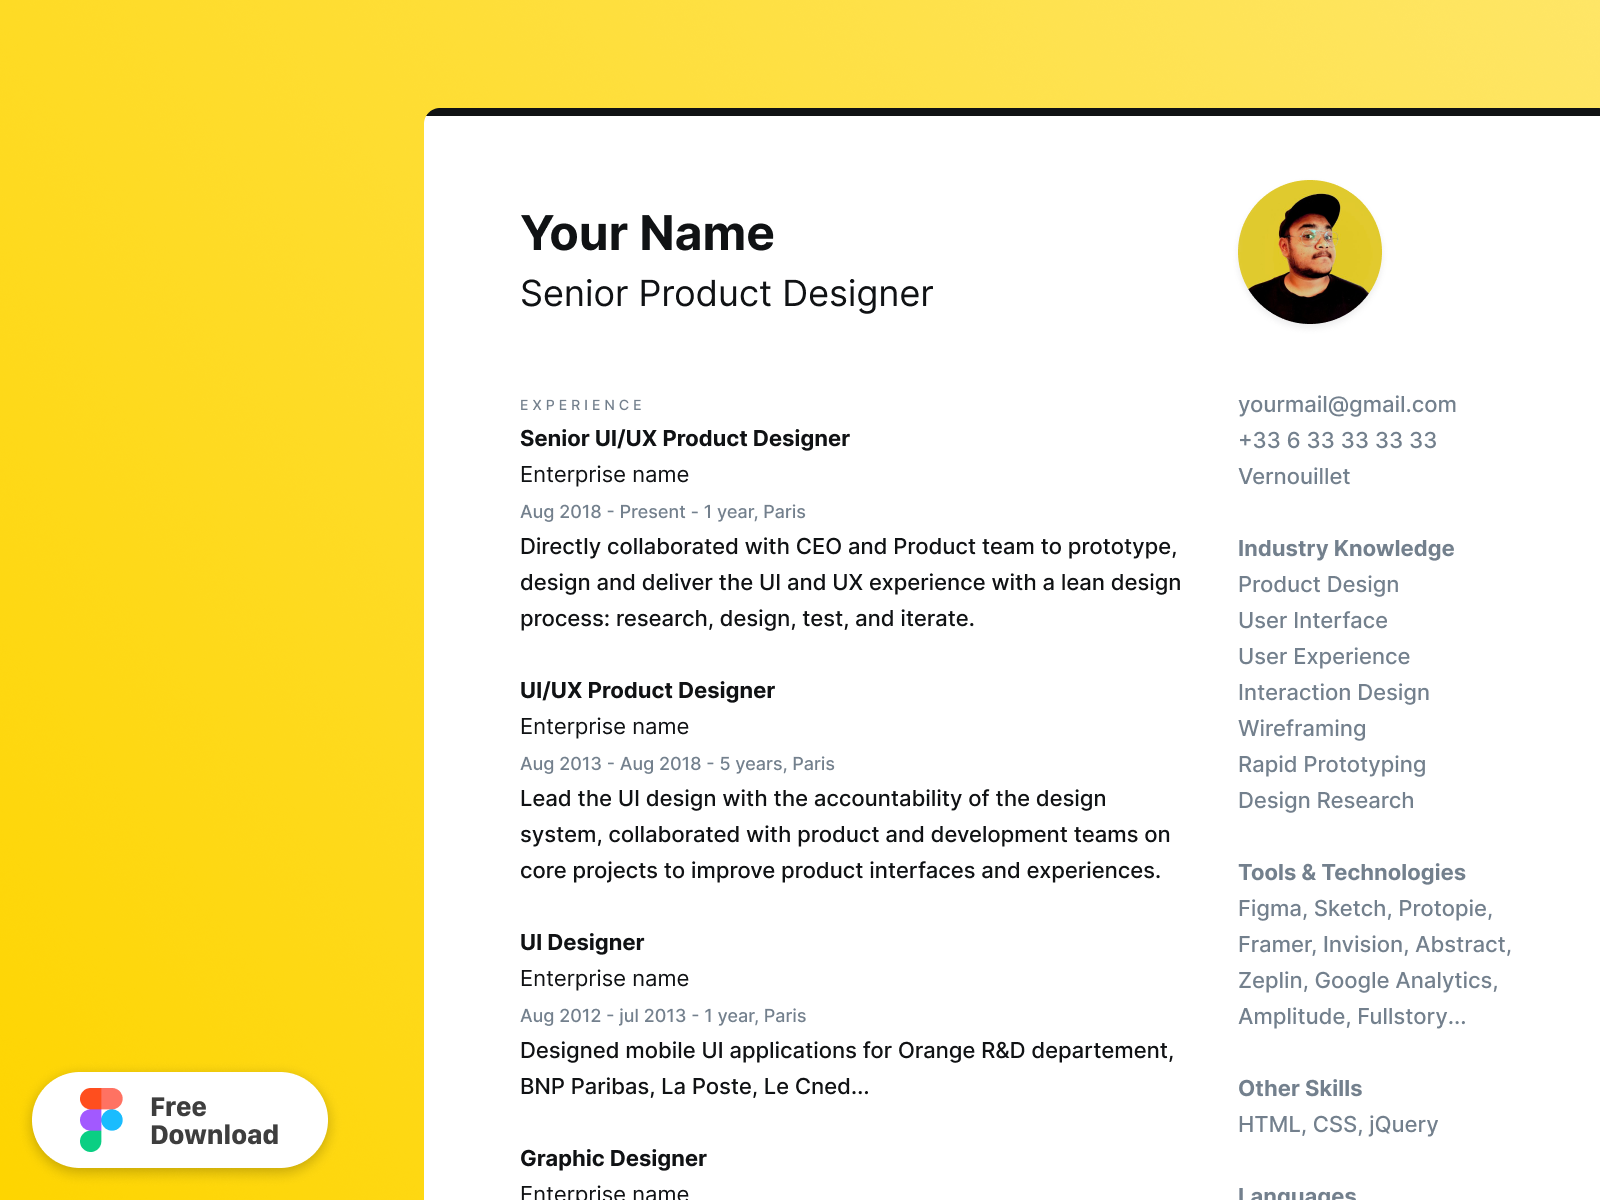 CV / Resume Figma Template by Alexis Riols on Dribbble